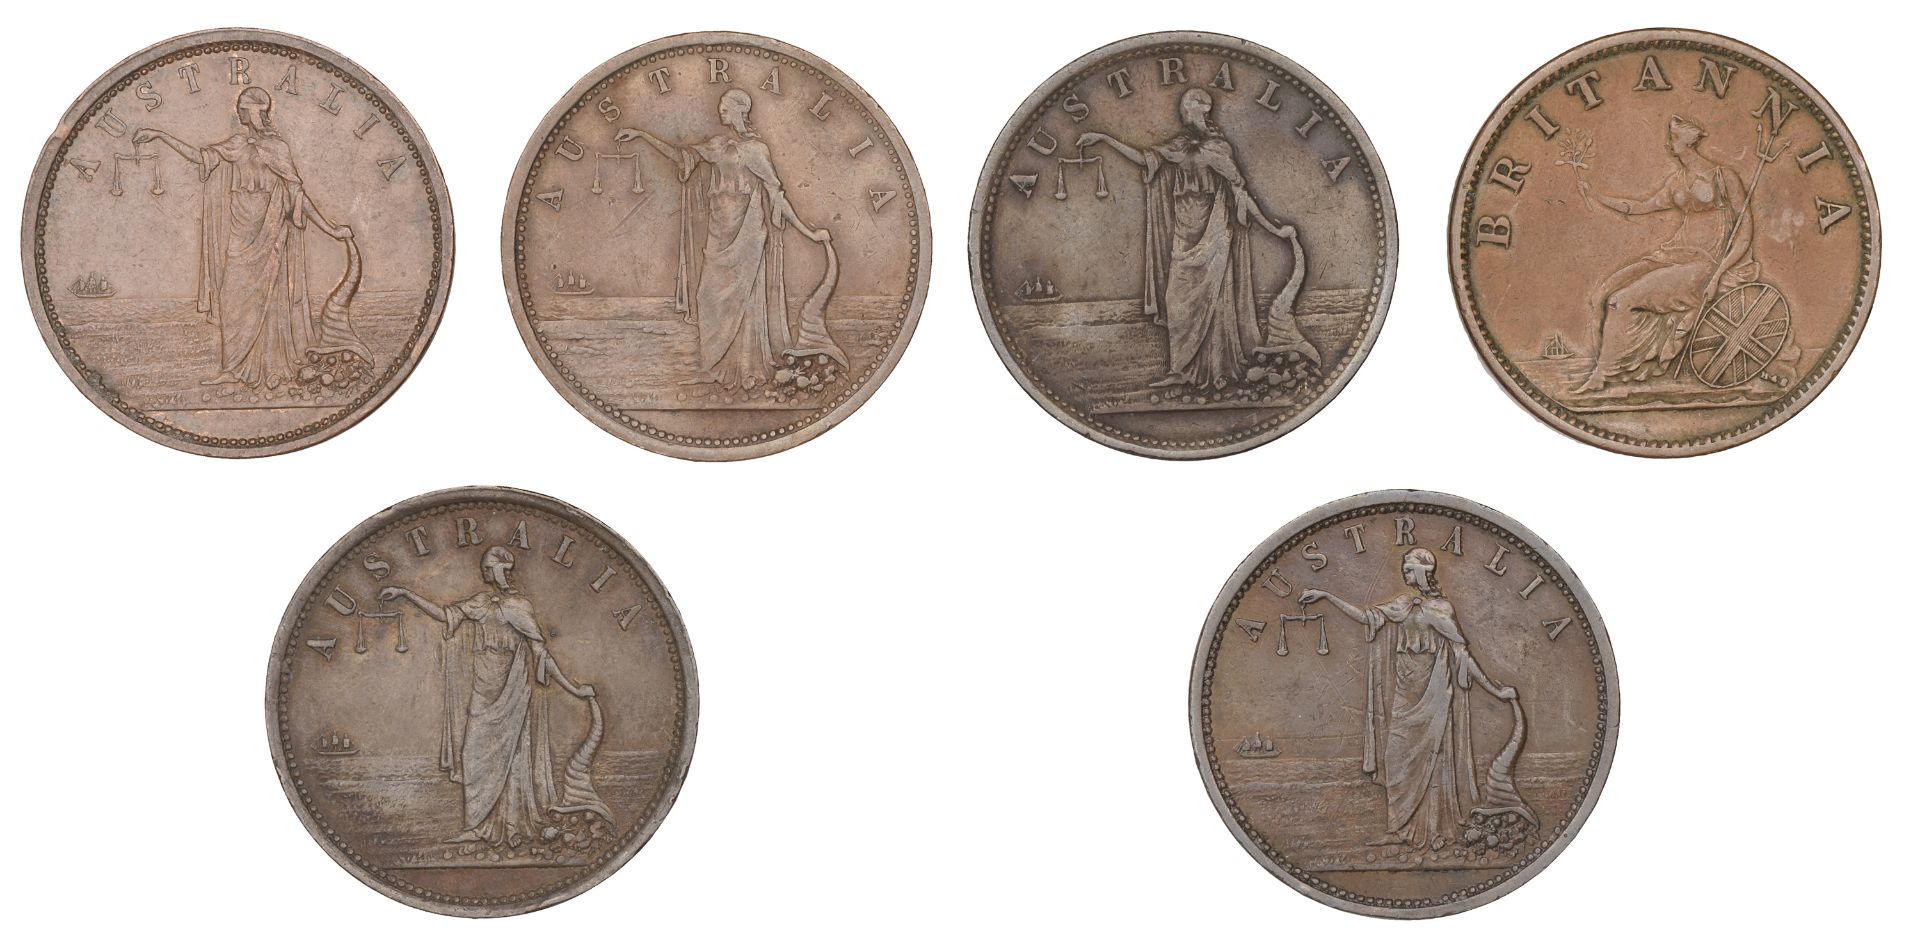 Australia, New South Wales, SYDNEY, Iredale & Co., Pennies (6), undated (G 143, 144, 144a, 1... - Image 2 of 2